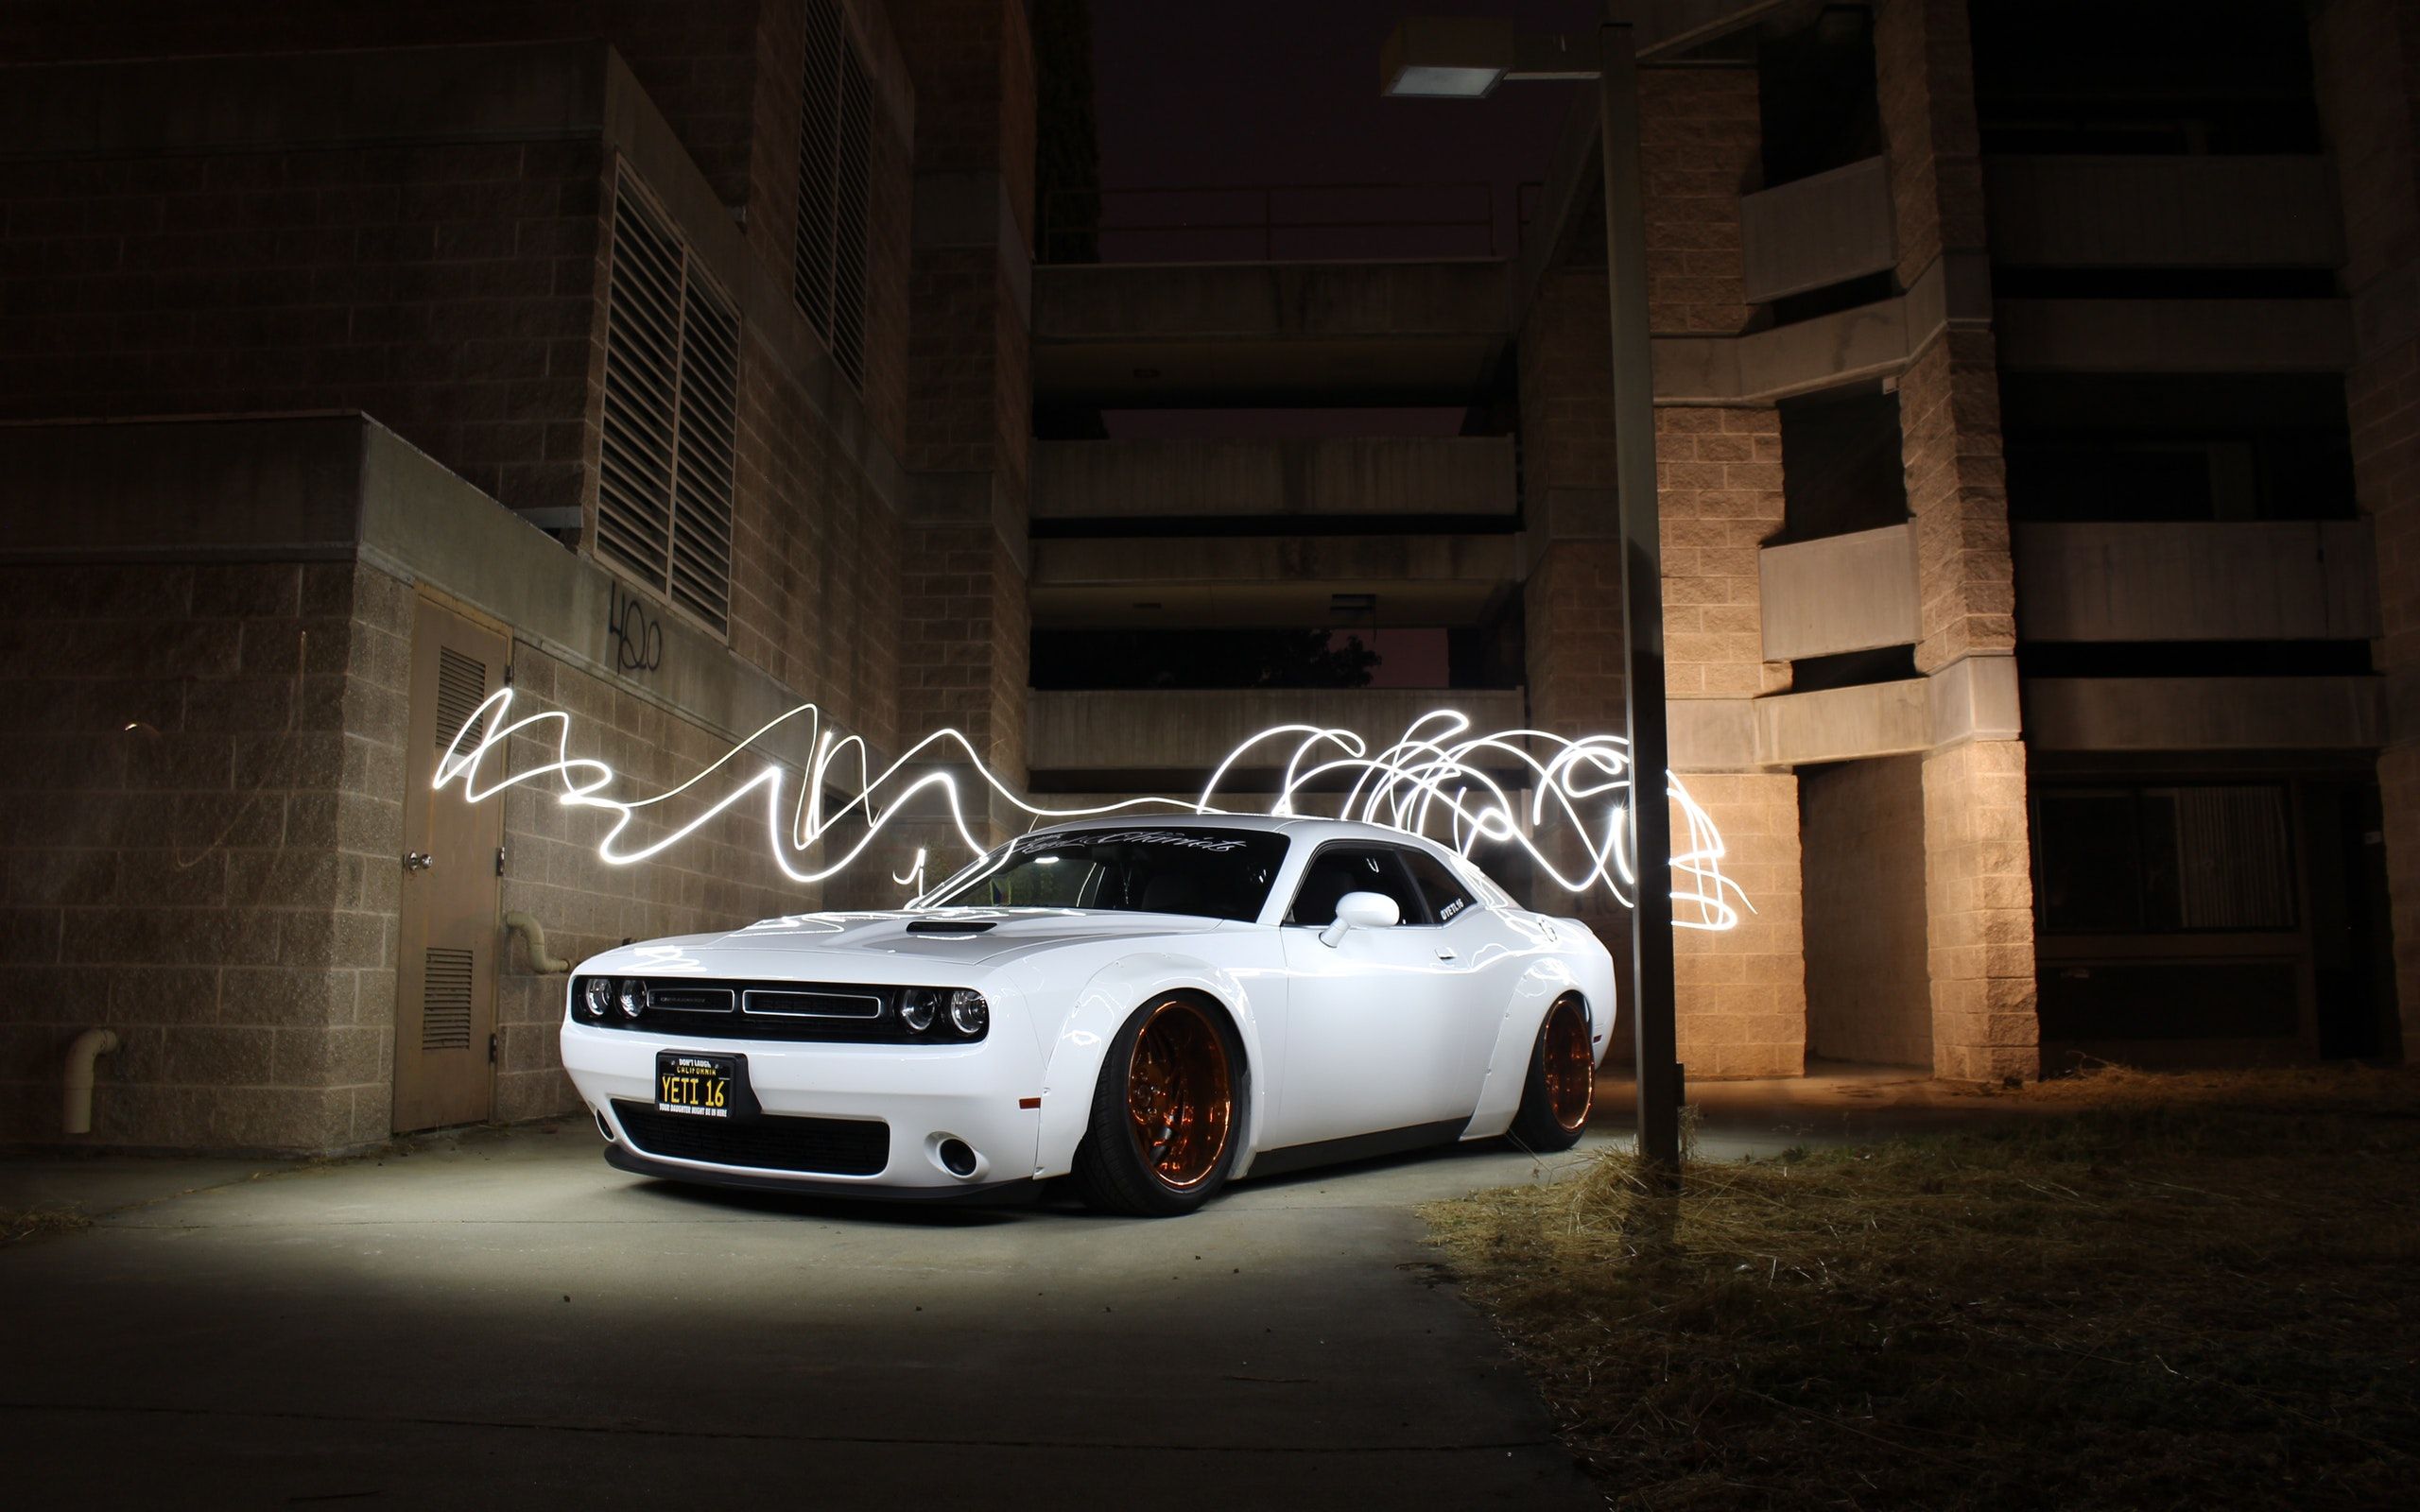 Dodge 4K wallpaper for your desktop or mobile screen free and easy to download